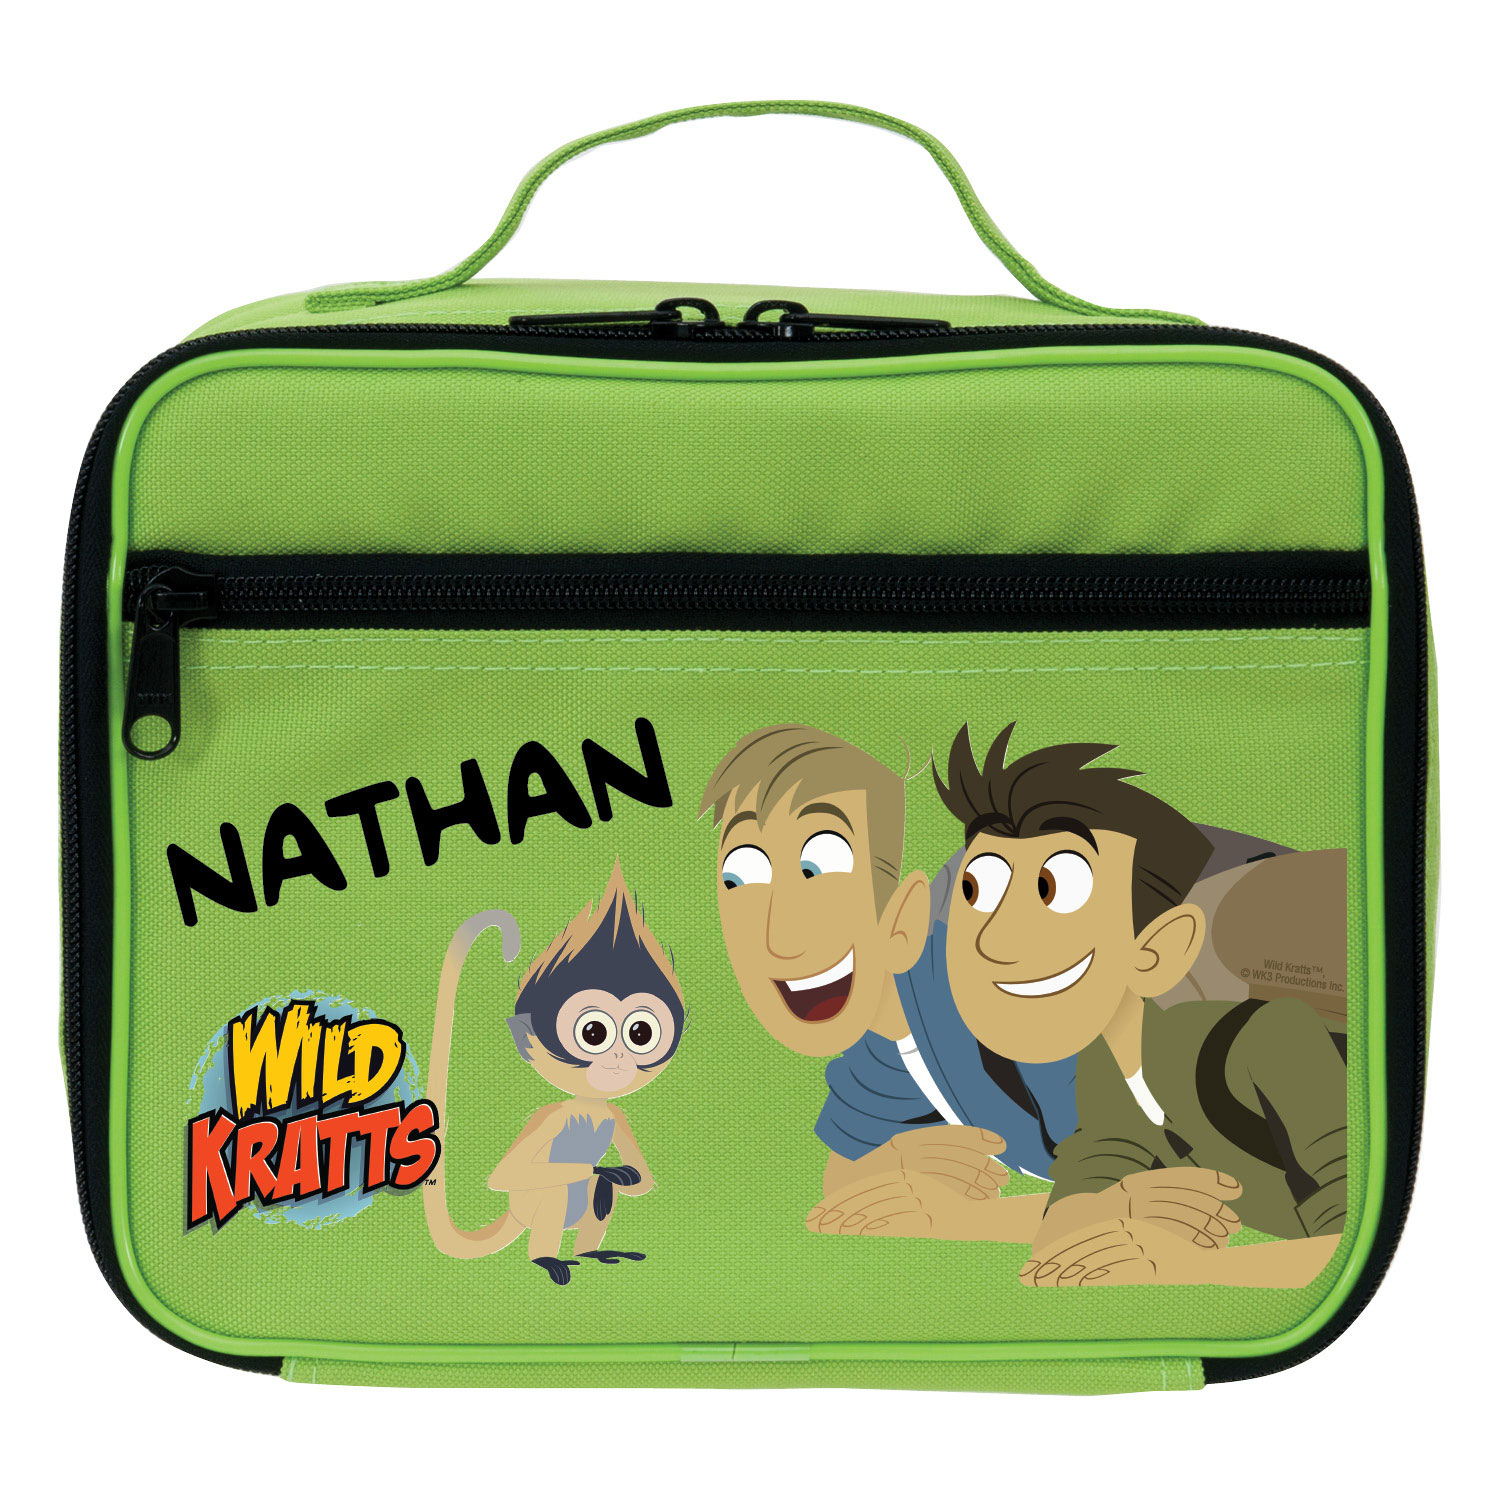 Wild Kratts Monkey and Kratt Brothers Green Lunch Bag